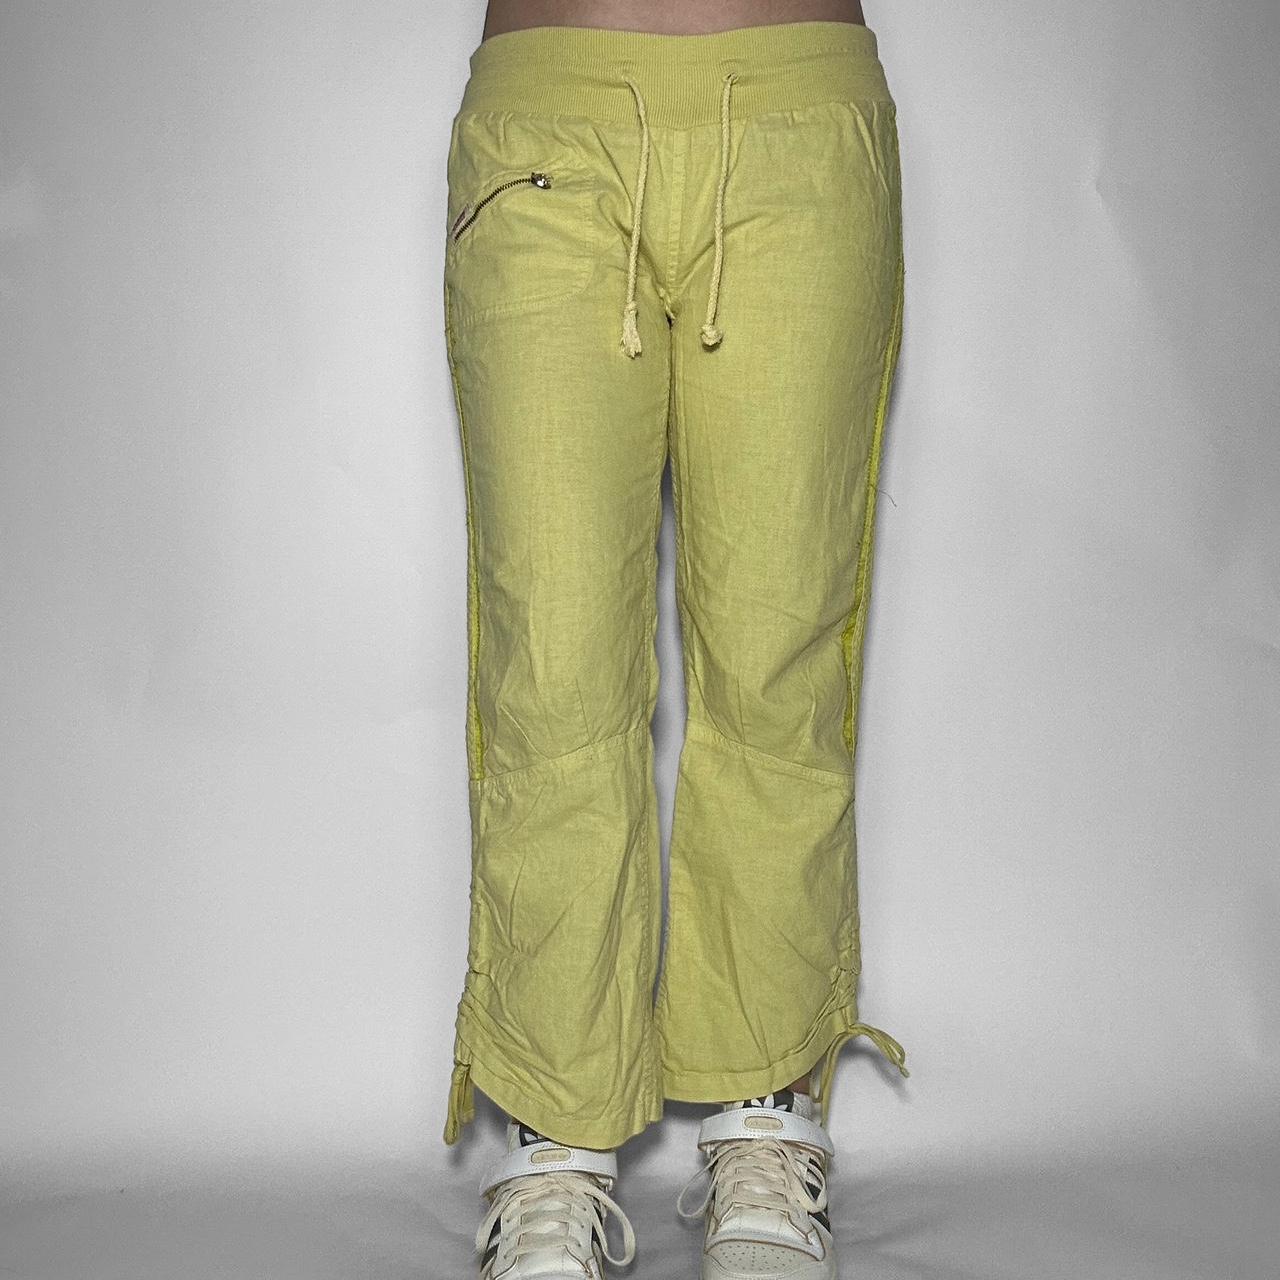 Vintage Y2k Guess drawstring green linen trousers